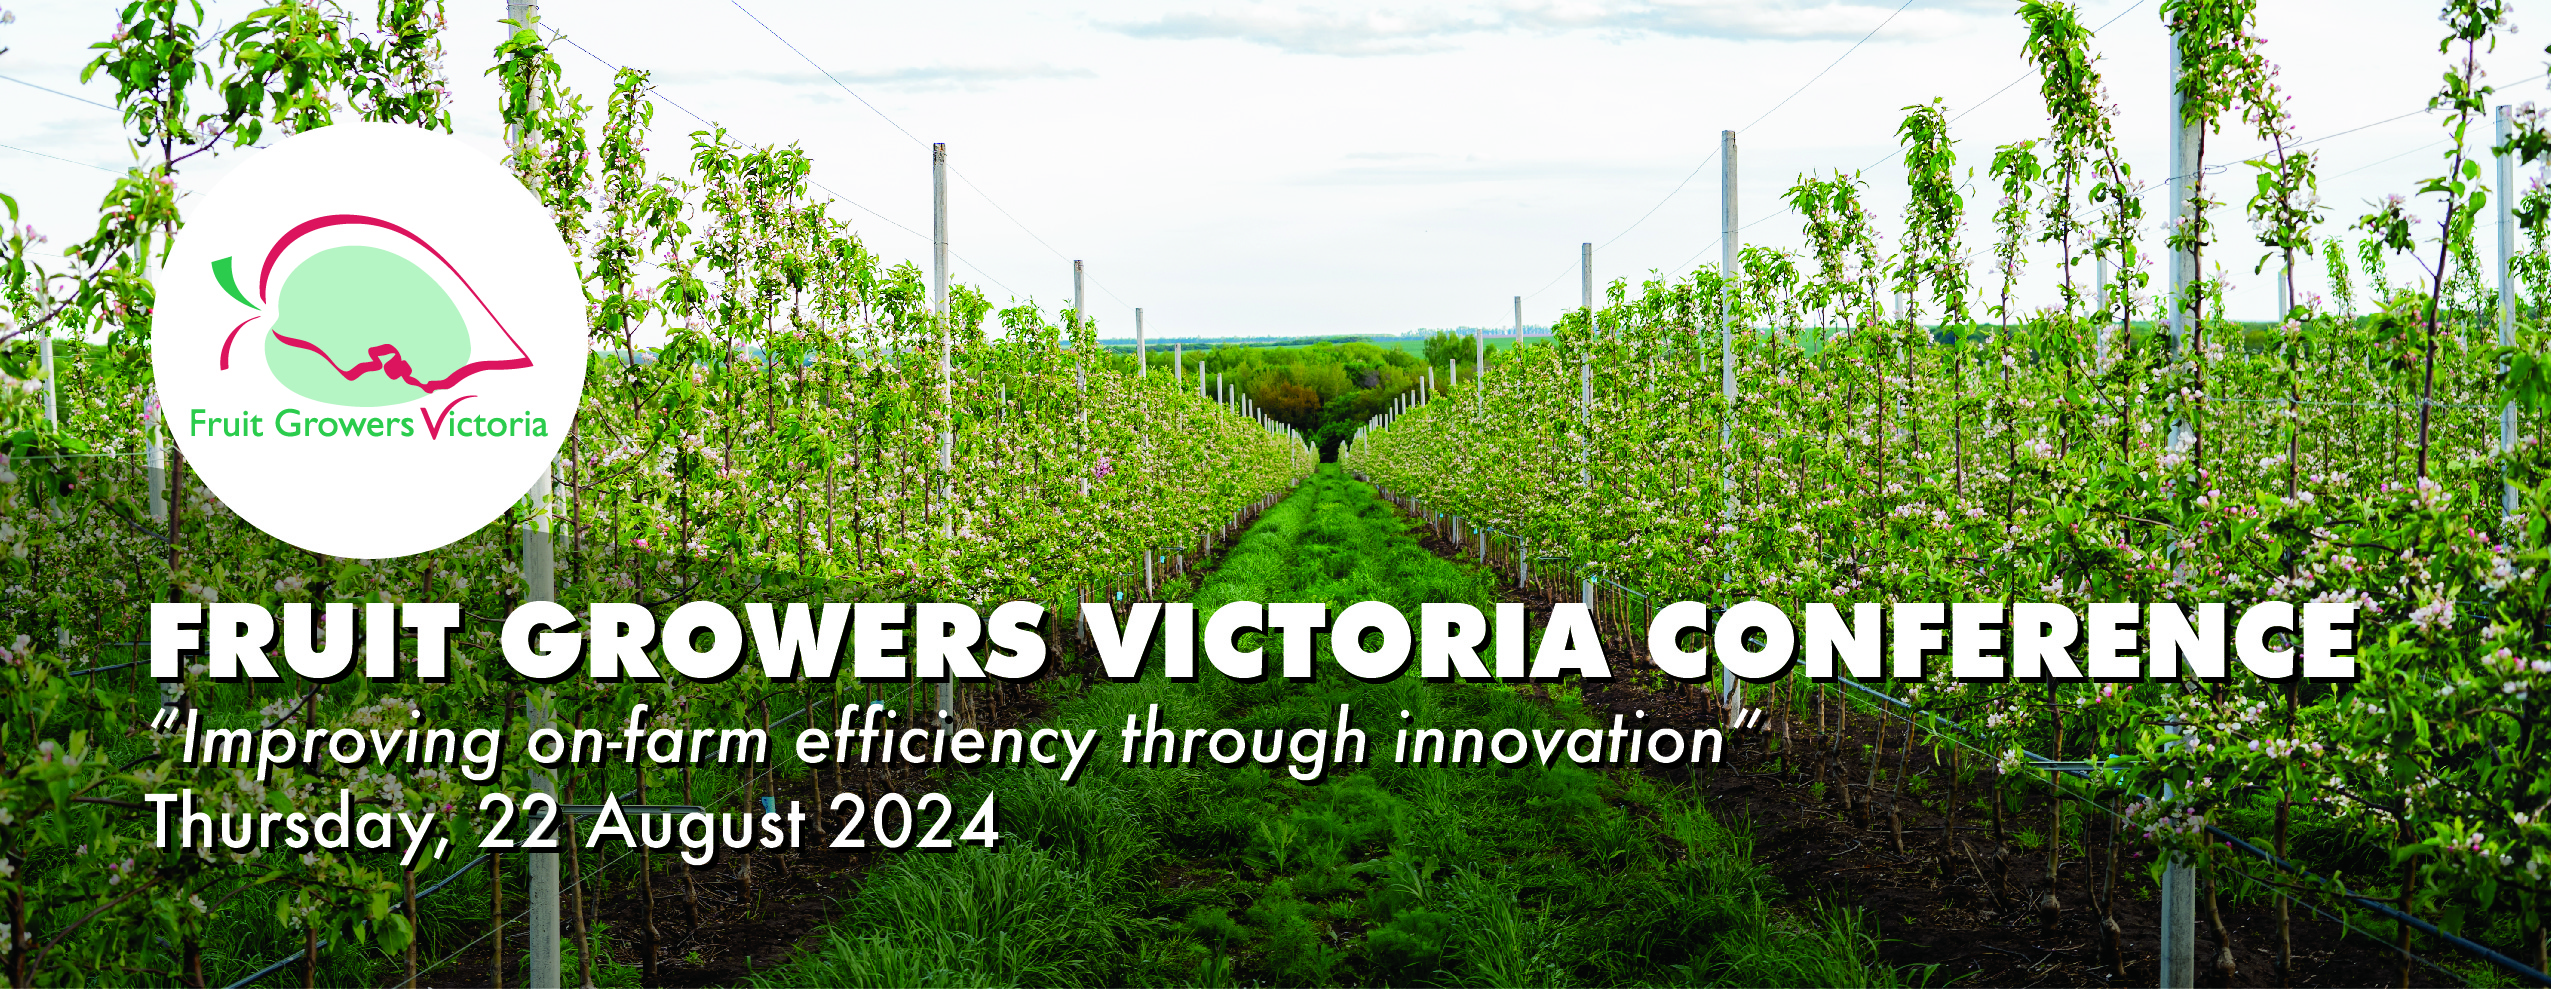 Fruit Growers Victoria Conference 